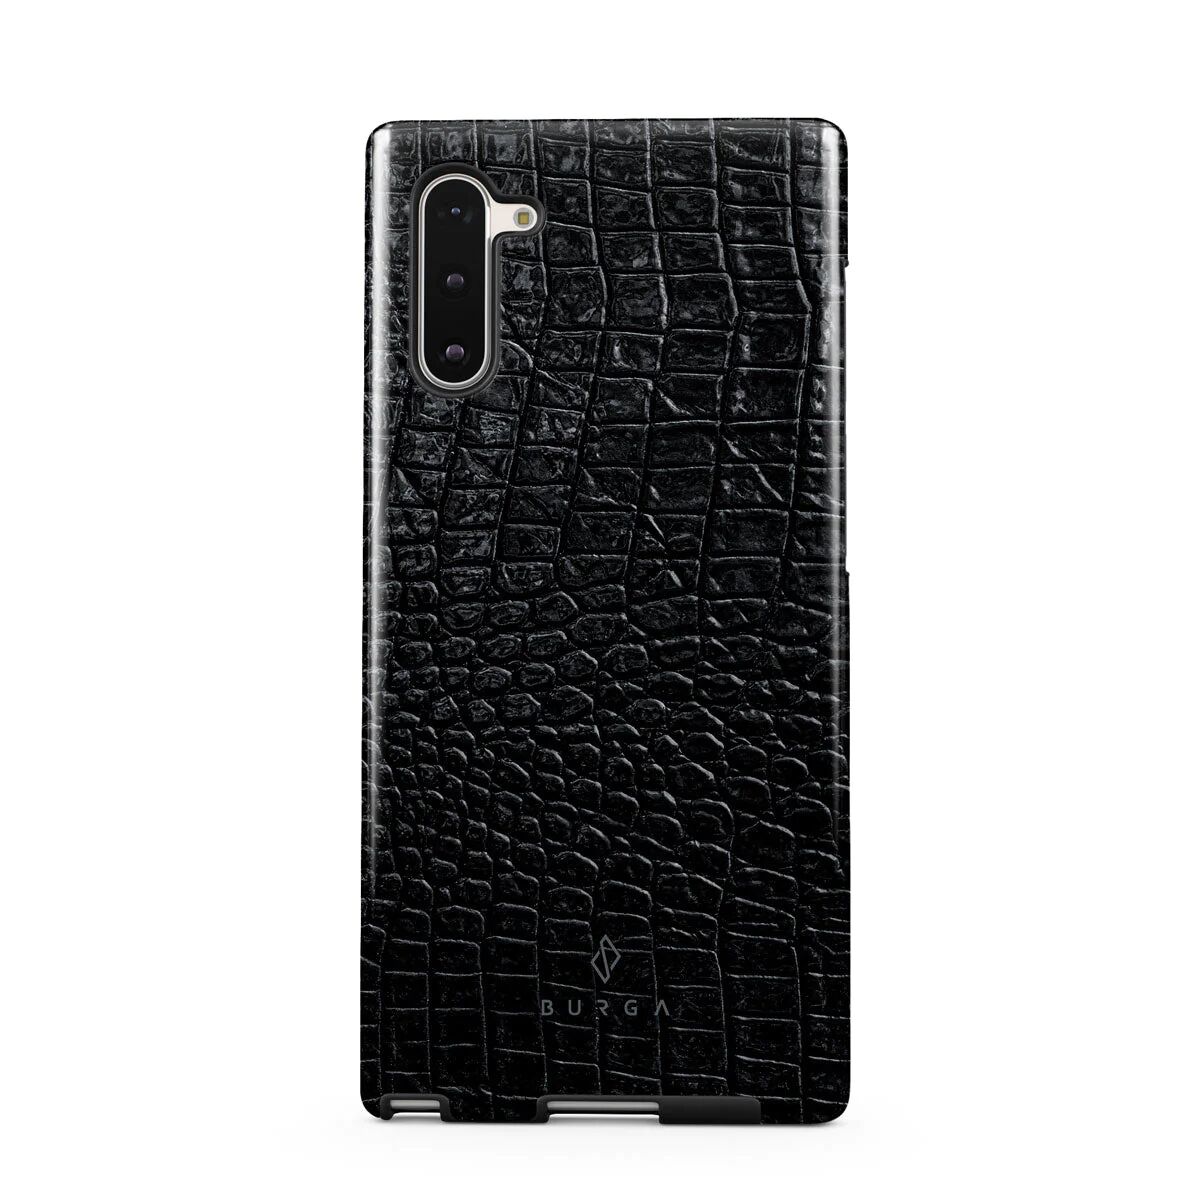 BURGA Reaper's Touch - Snakeskin Samsung Galaxy Note 10 Case